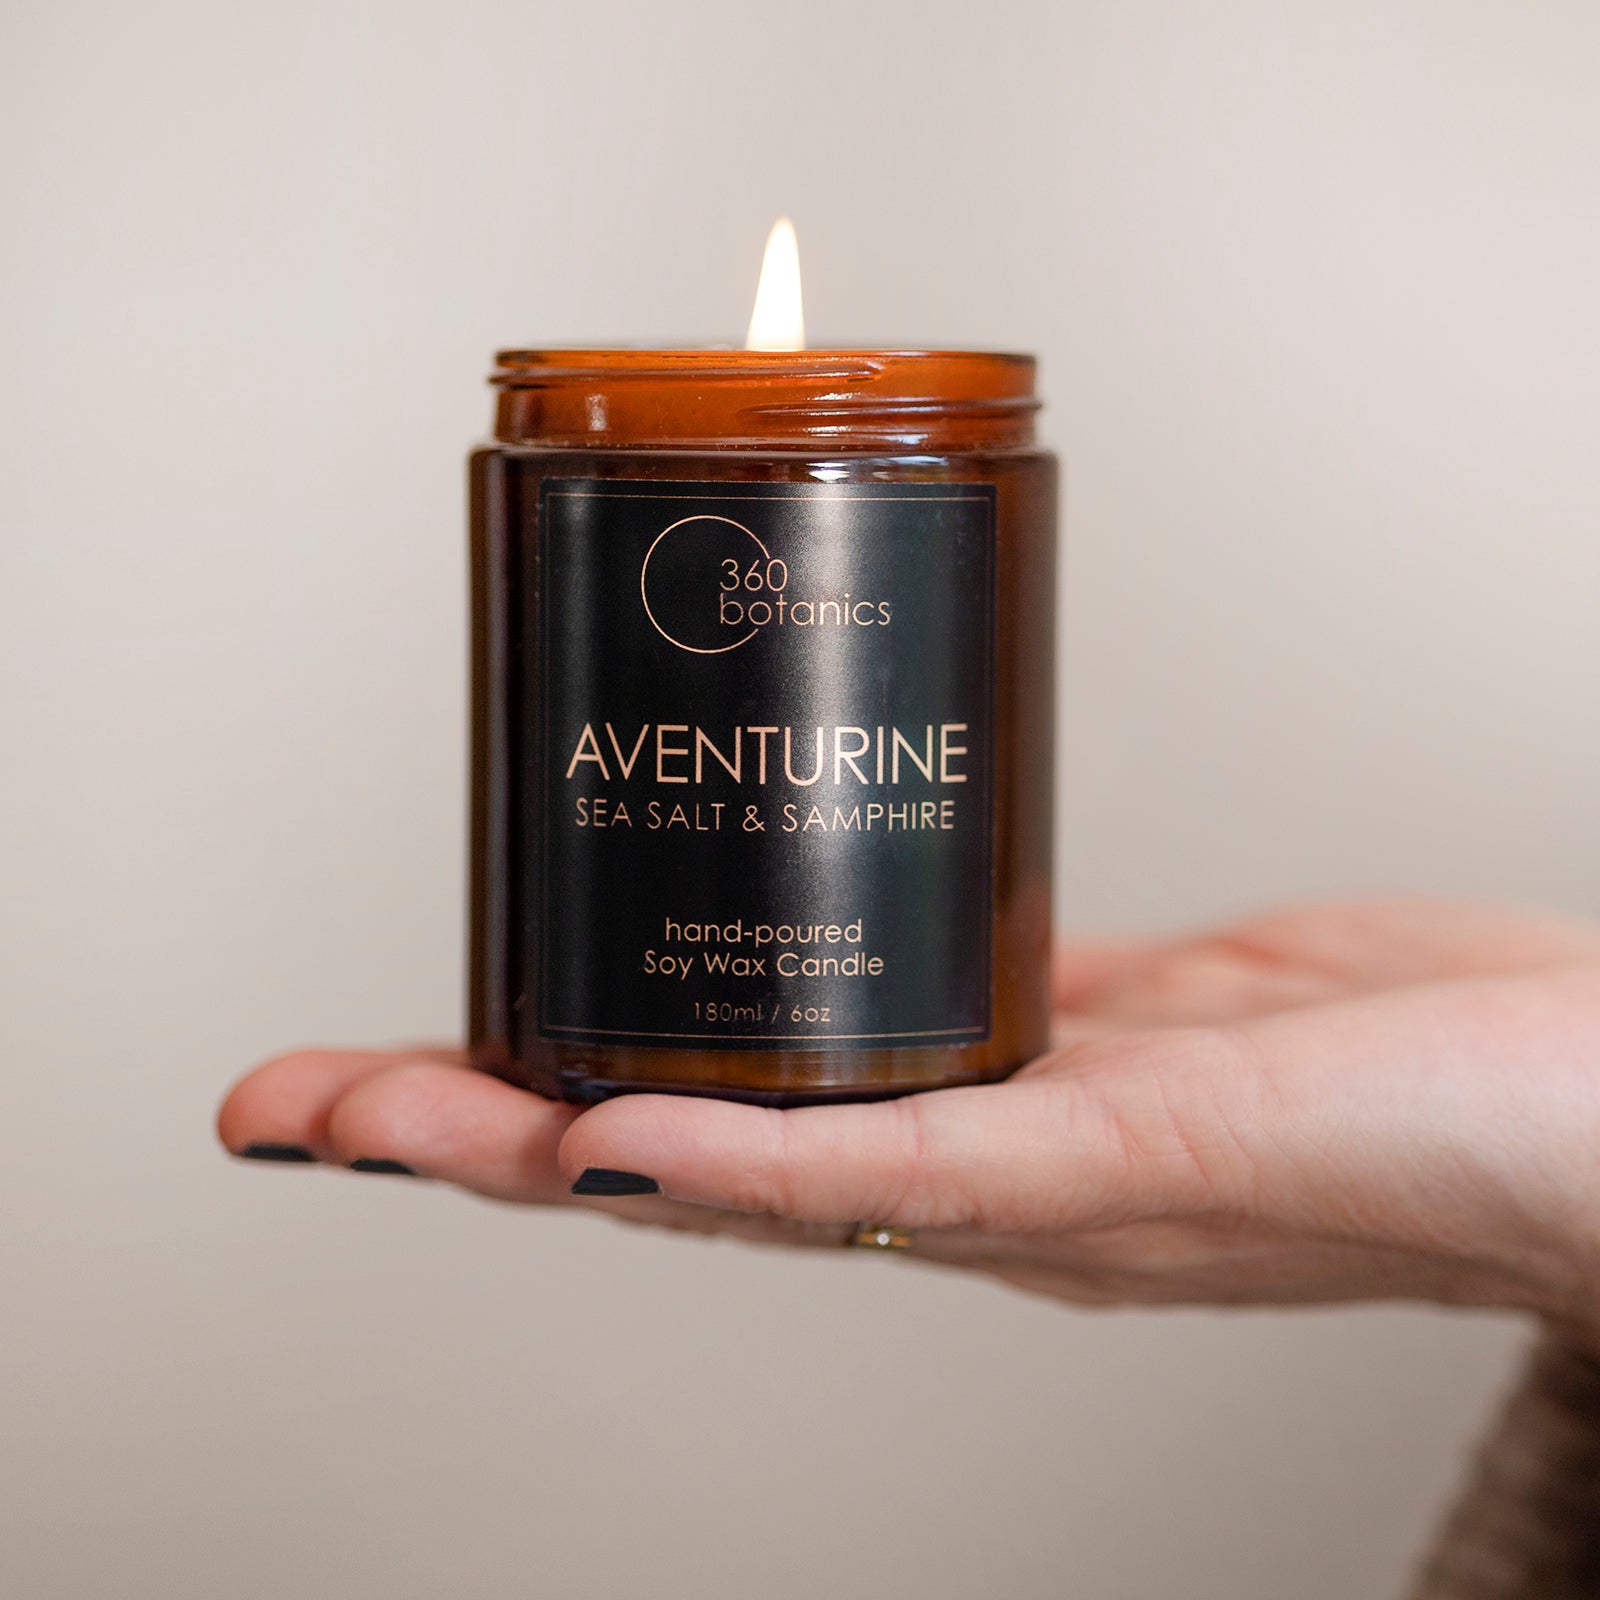 A hand holding a lit Aventurine soy wax candle by 360 Botanics, with a label stating 'Sea Salt & Samphire', 'hand-poured', and a 180ml / 6 oz volume indication, against a neutral background.